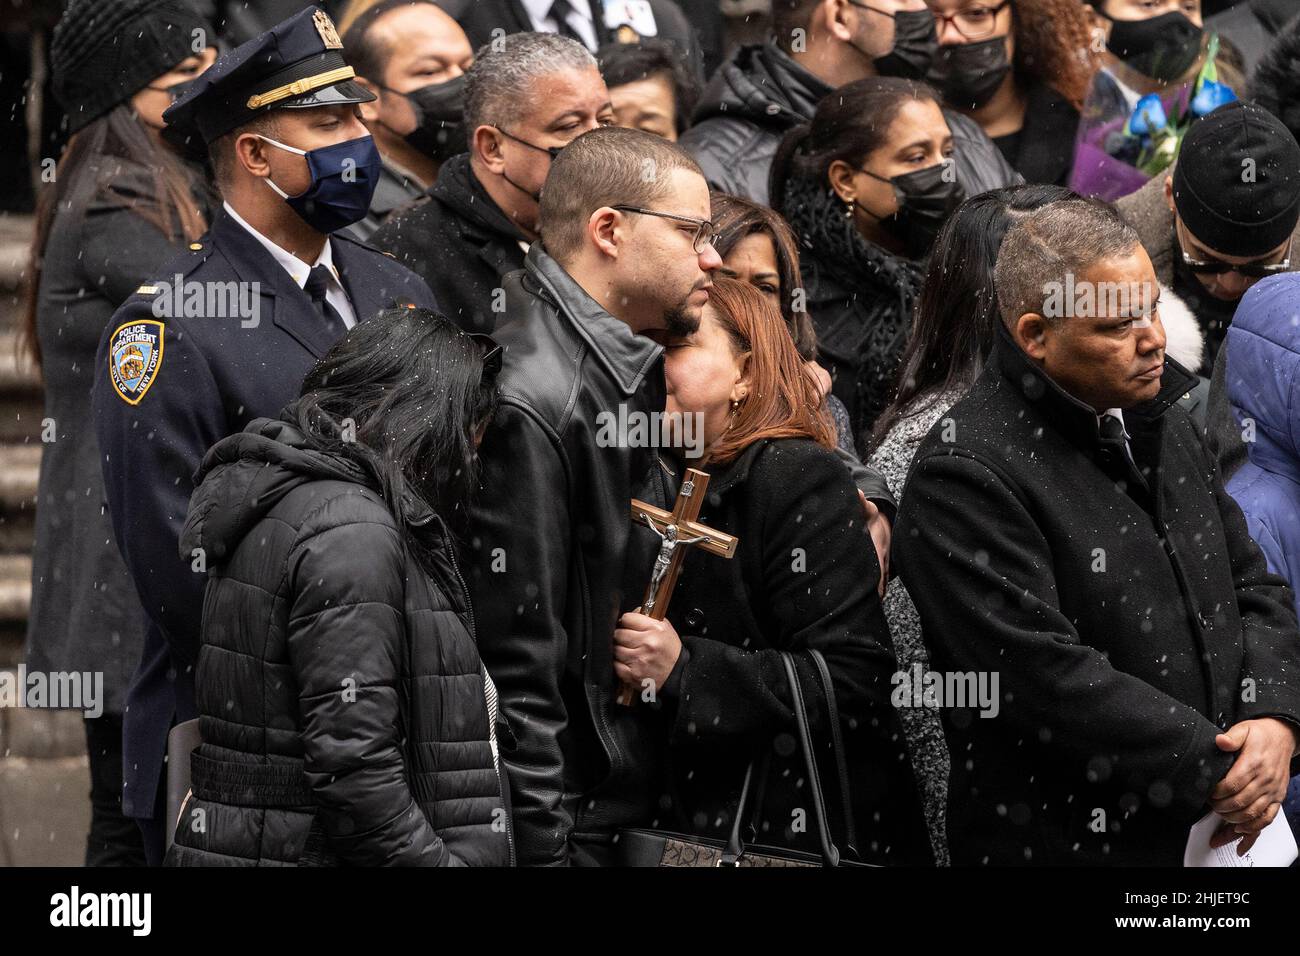 New York, United States. 28th Jan, 2022. Mother and brother of fallen officer embraced during St. Patrick's Cathedral for police officer Jason Rivera funeral. The 22-year-old Rivera was killed when he and fellow NYPD officer, Wilbert Mora, responded to a domestic incident in Harlem on January 21. Rivera was posthumously promoted Friday from officer to detective first-grade. (Photo by Lev Radin/Pacific Press) Credit: Pacific Press Media Production Corp./Alamy Live News Stock Photo